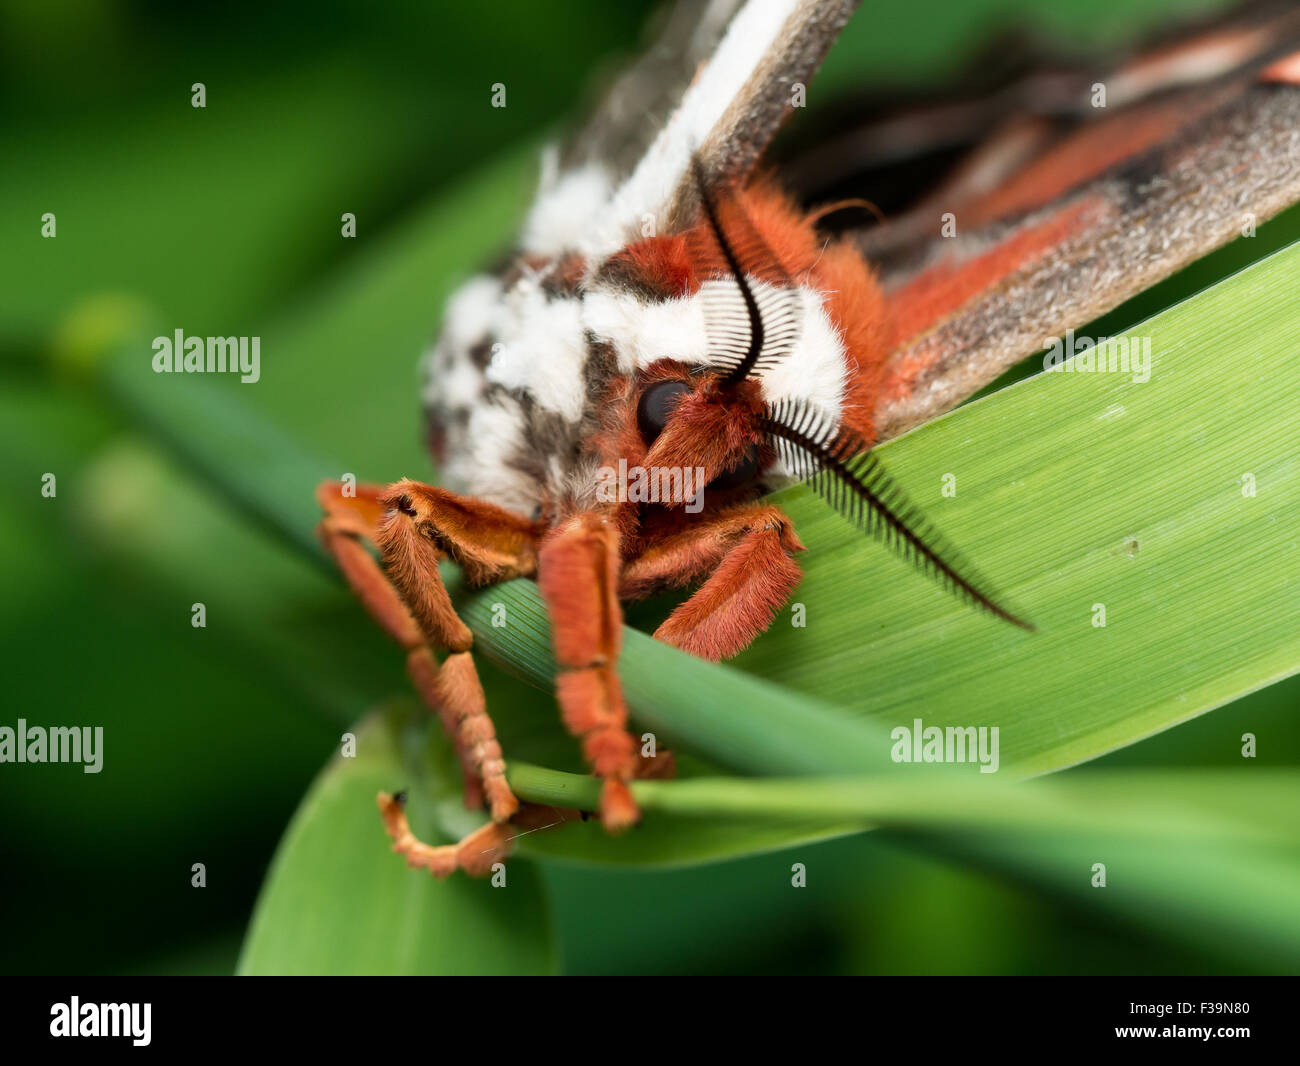 front view of orange, white and brown giant silk moth on green grass Stock Photo